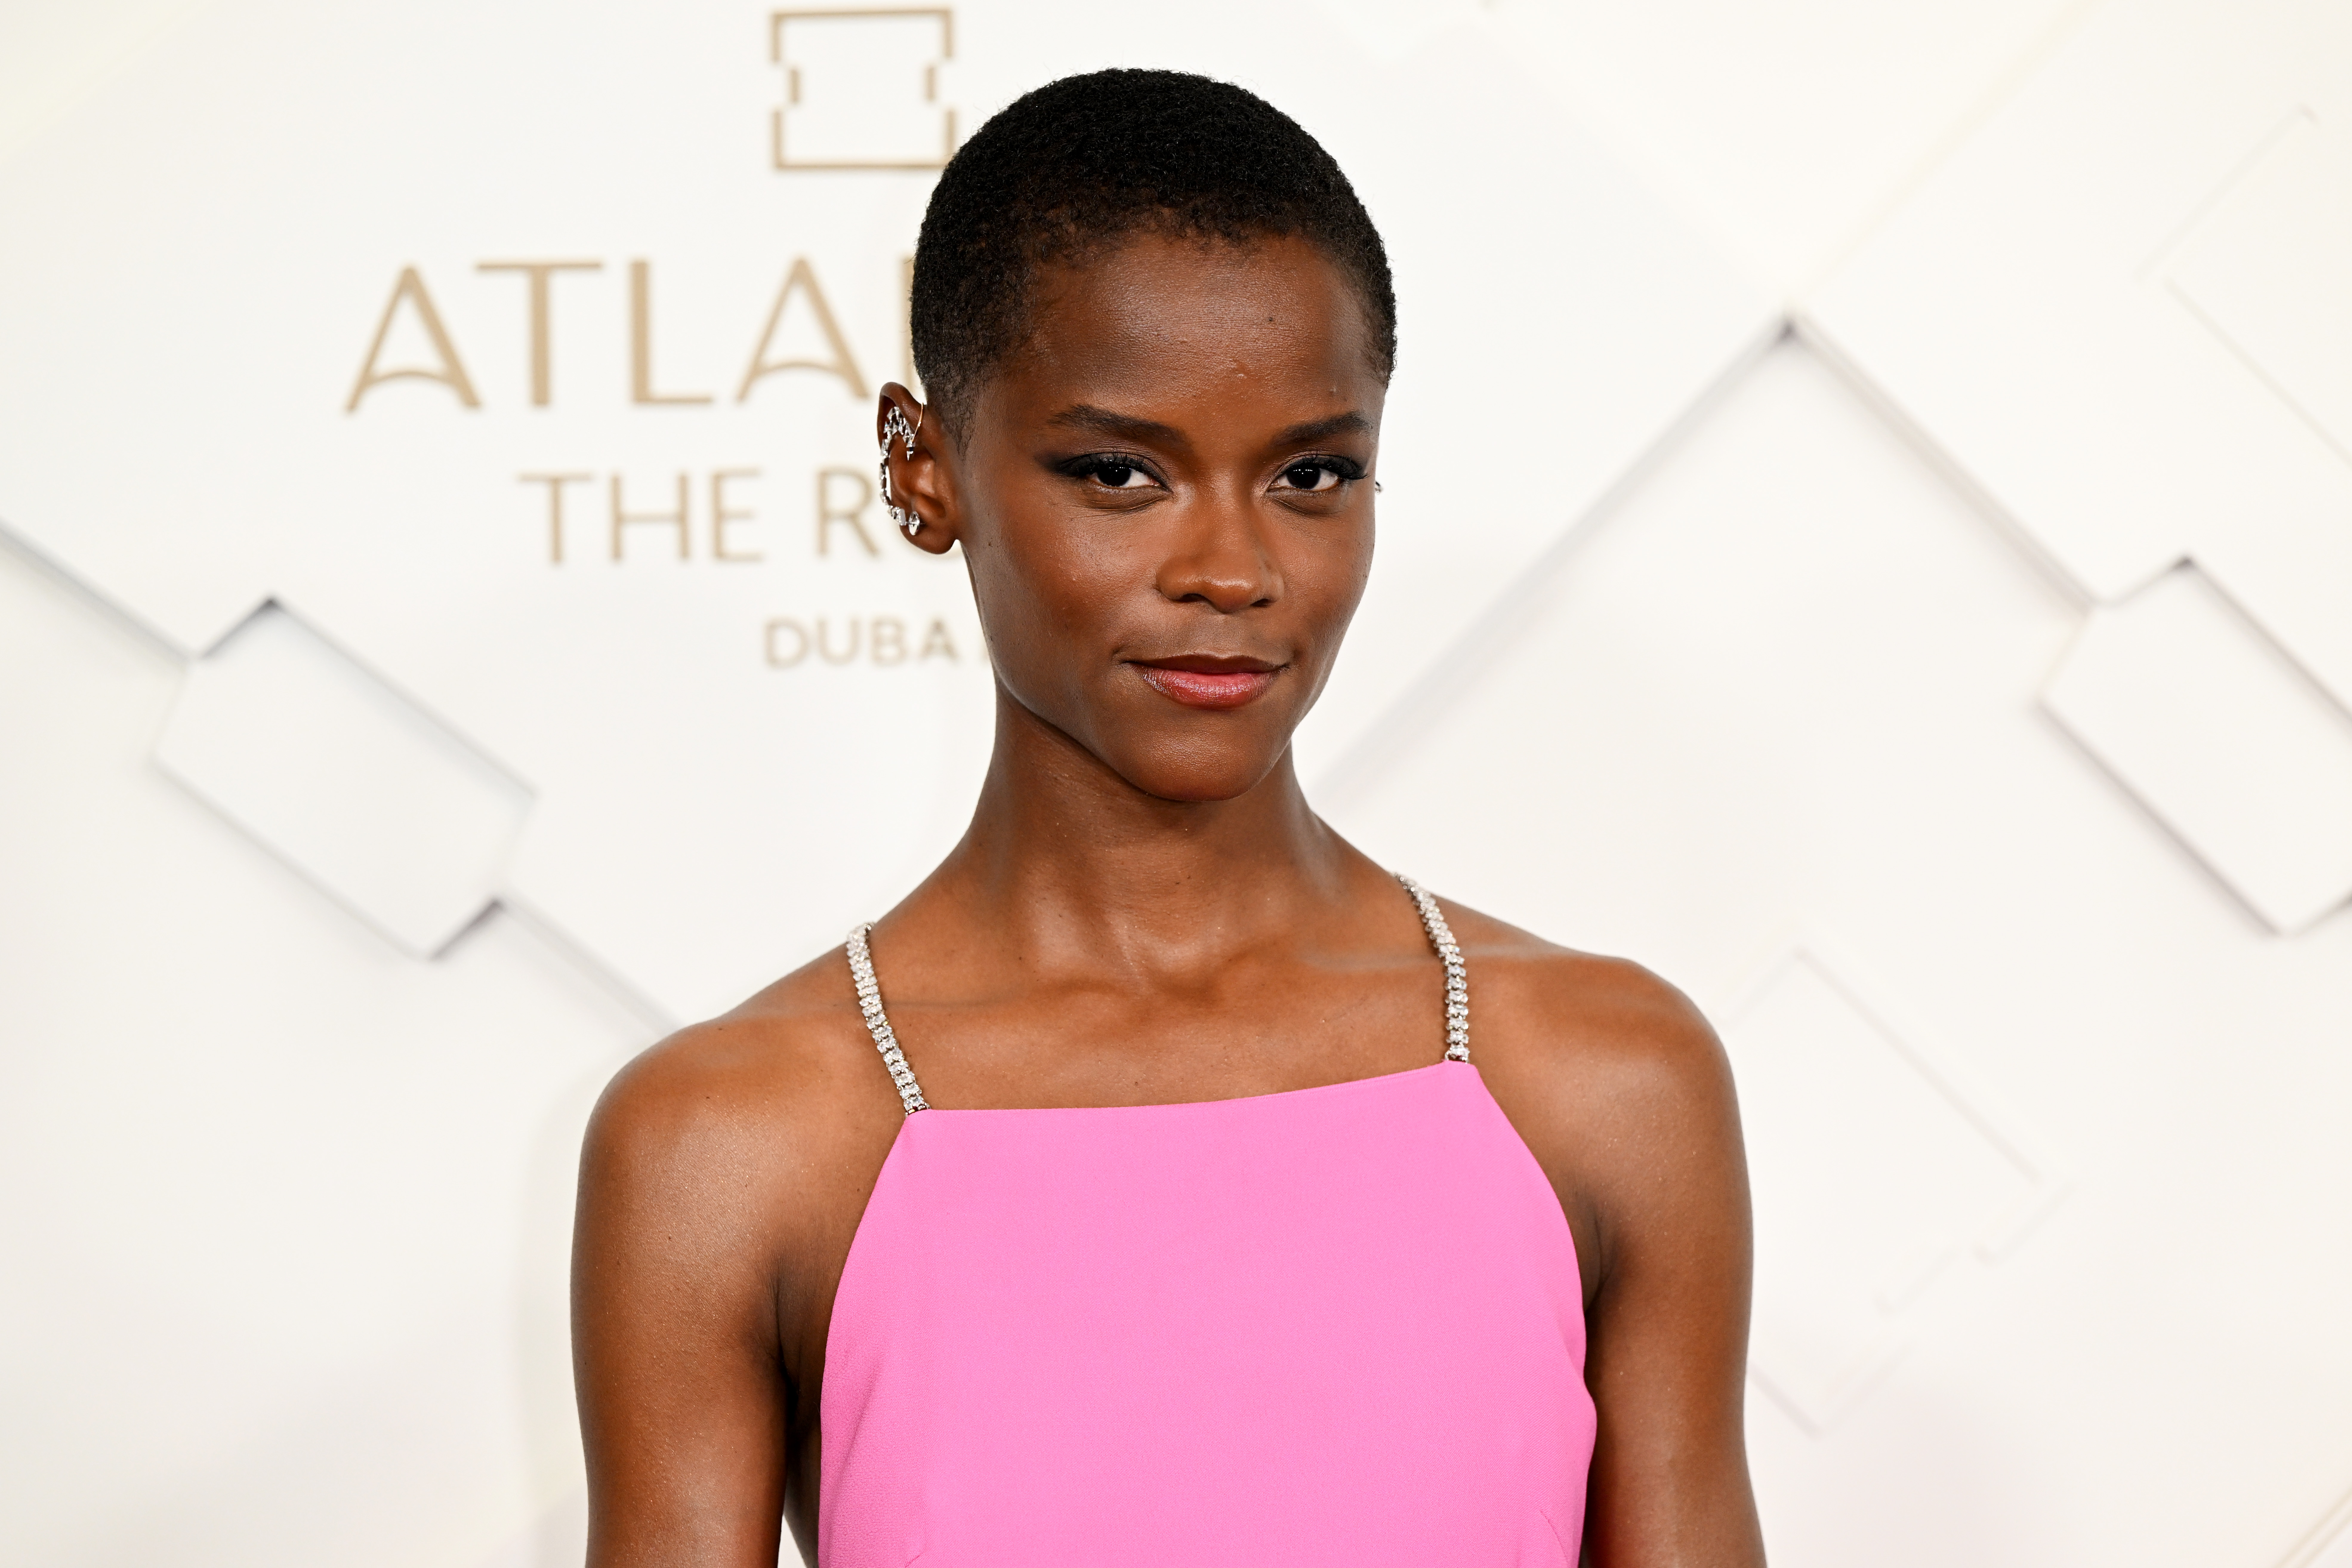 Letitia Wright at the Grand Reveal Weekend for Atlantis The Royal, Dubai's new ultra-luxury hotel on January 21, 2023, in Dubai, United Arab Emirates. | Source: Getty Images